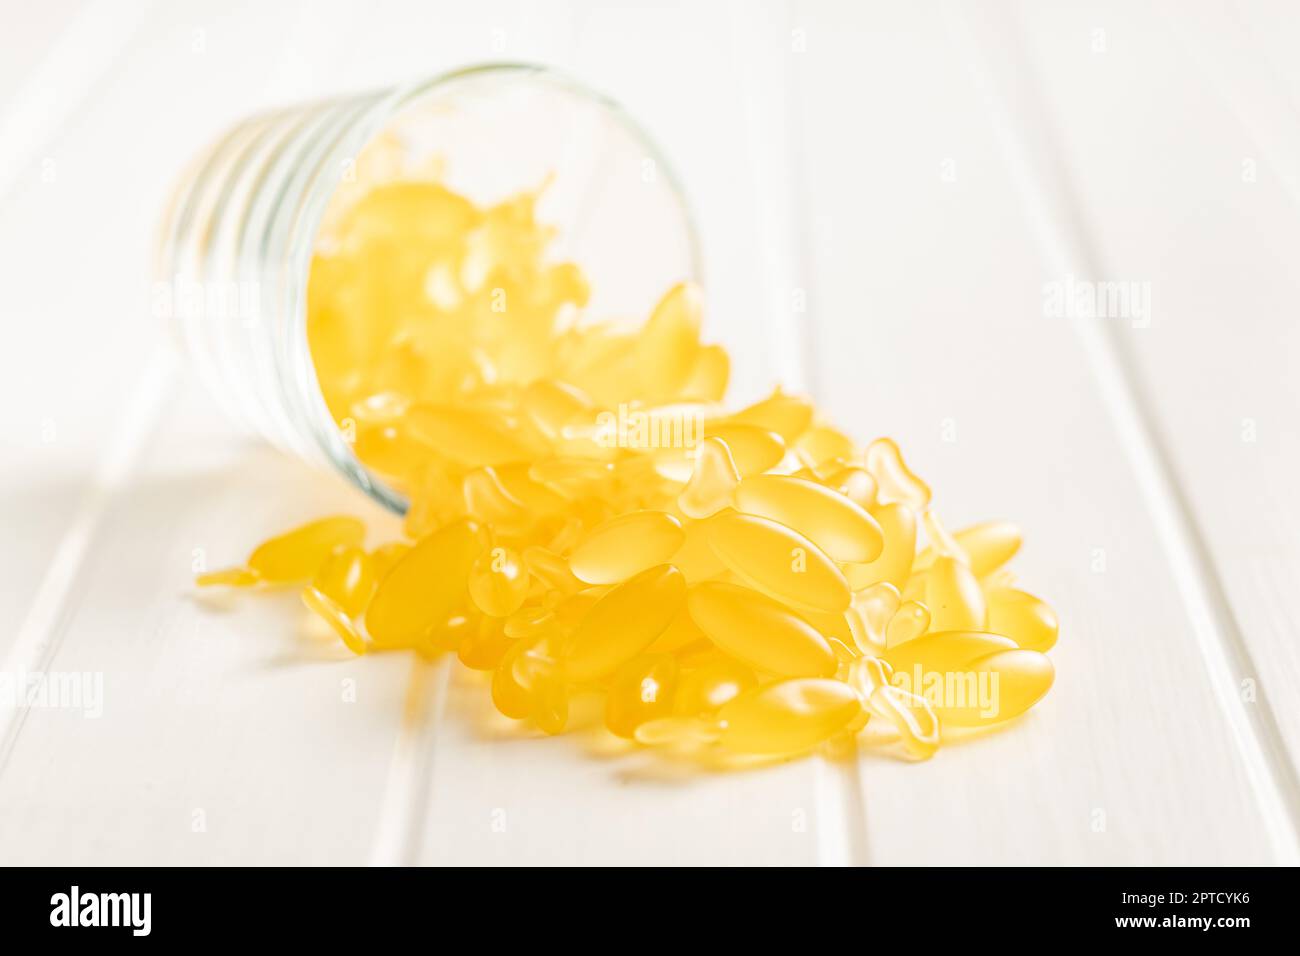 Fish oil capsules. Yellow omega 3 pills in glass on the white table. Stock Photo